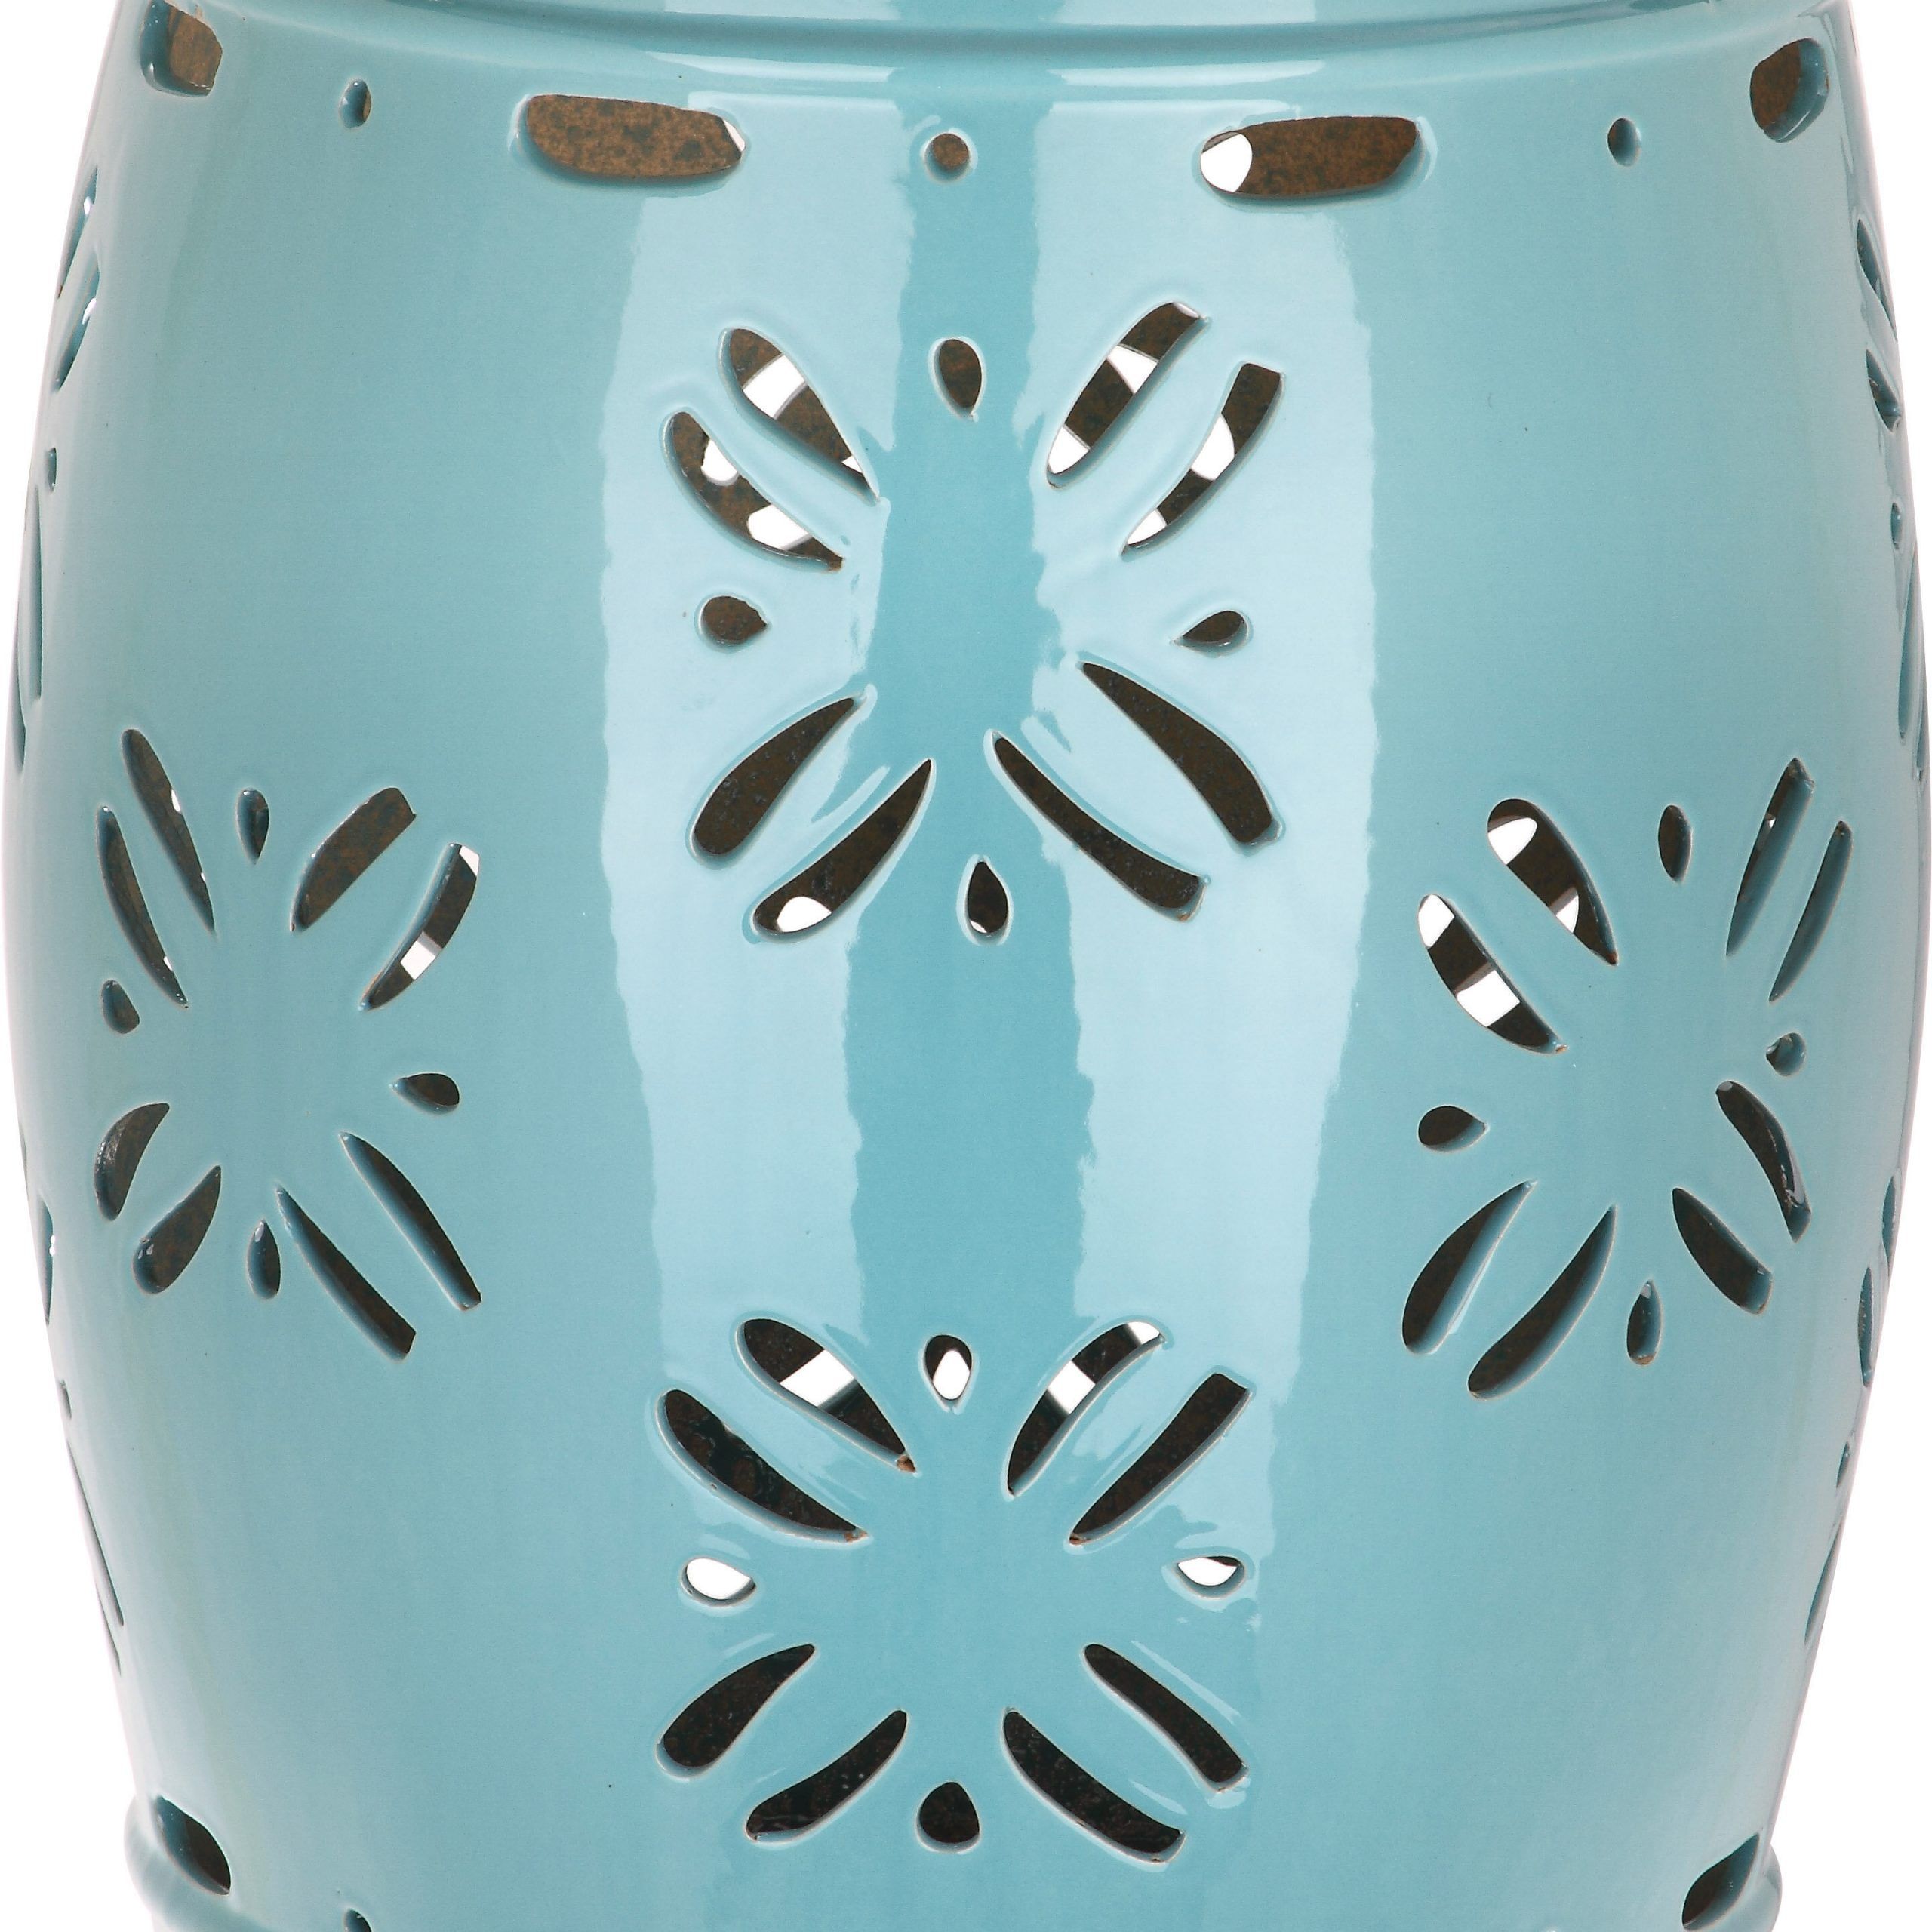 Ceramic Garden Accent Stools You'Ll Love In 2020 | Wayfair Throughout Lavin Ceramic Garden Stools (Photo 6 of 25)